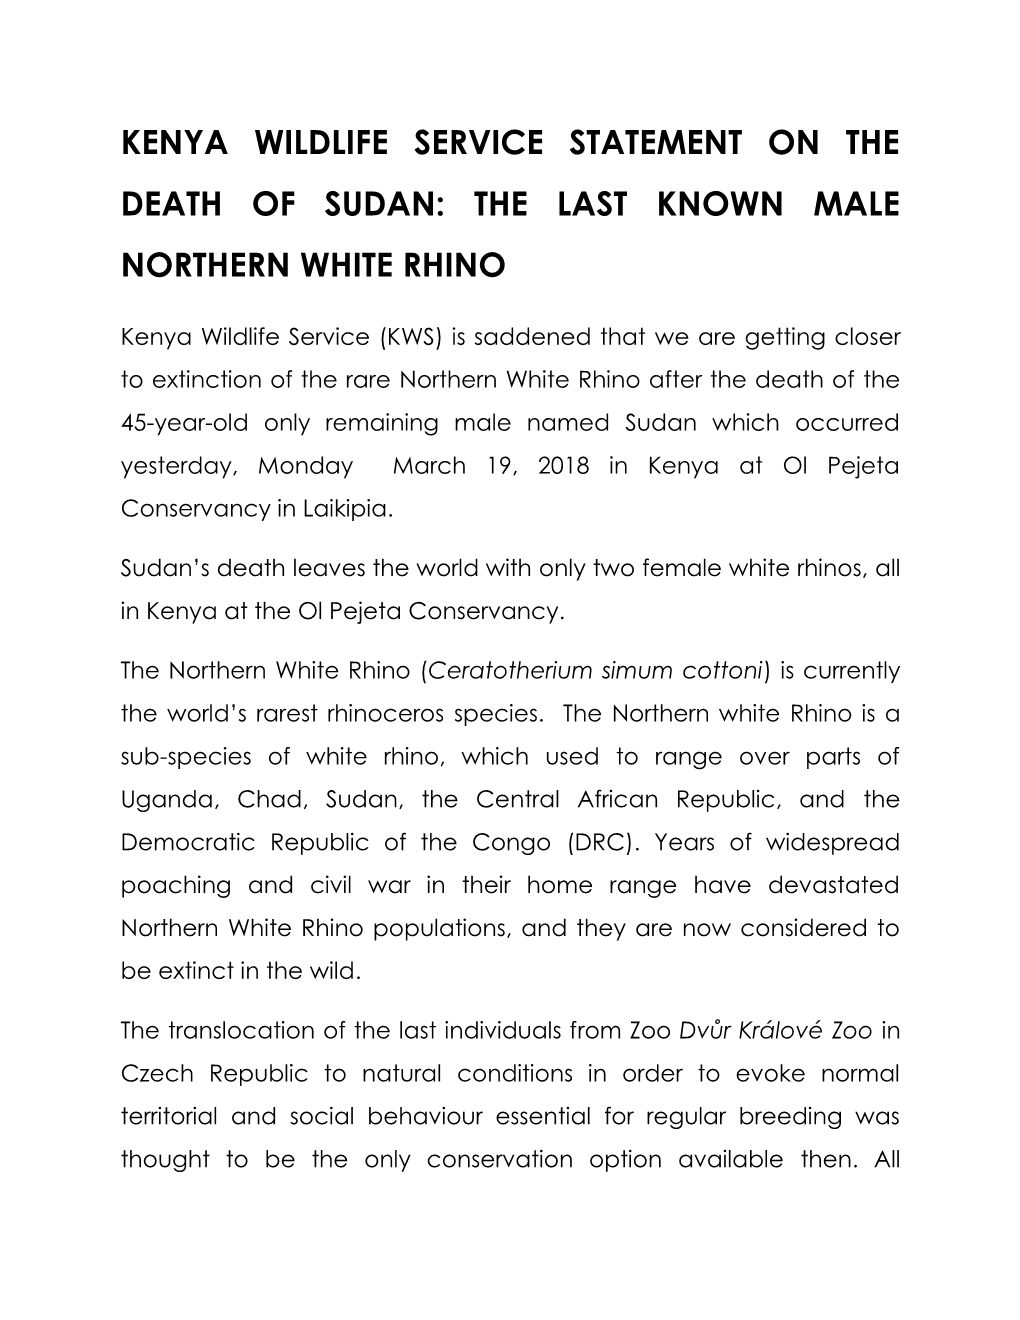 Kenya Wildlife Service Statement on the Death of Sudan: the Last Known Male Northern White Rhino